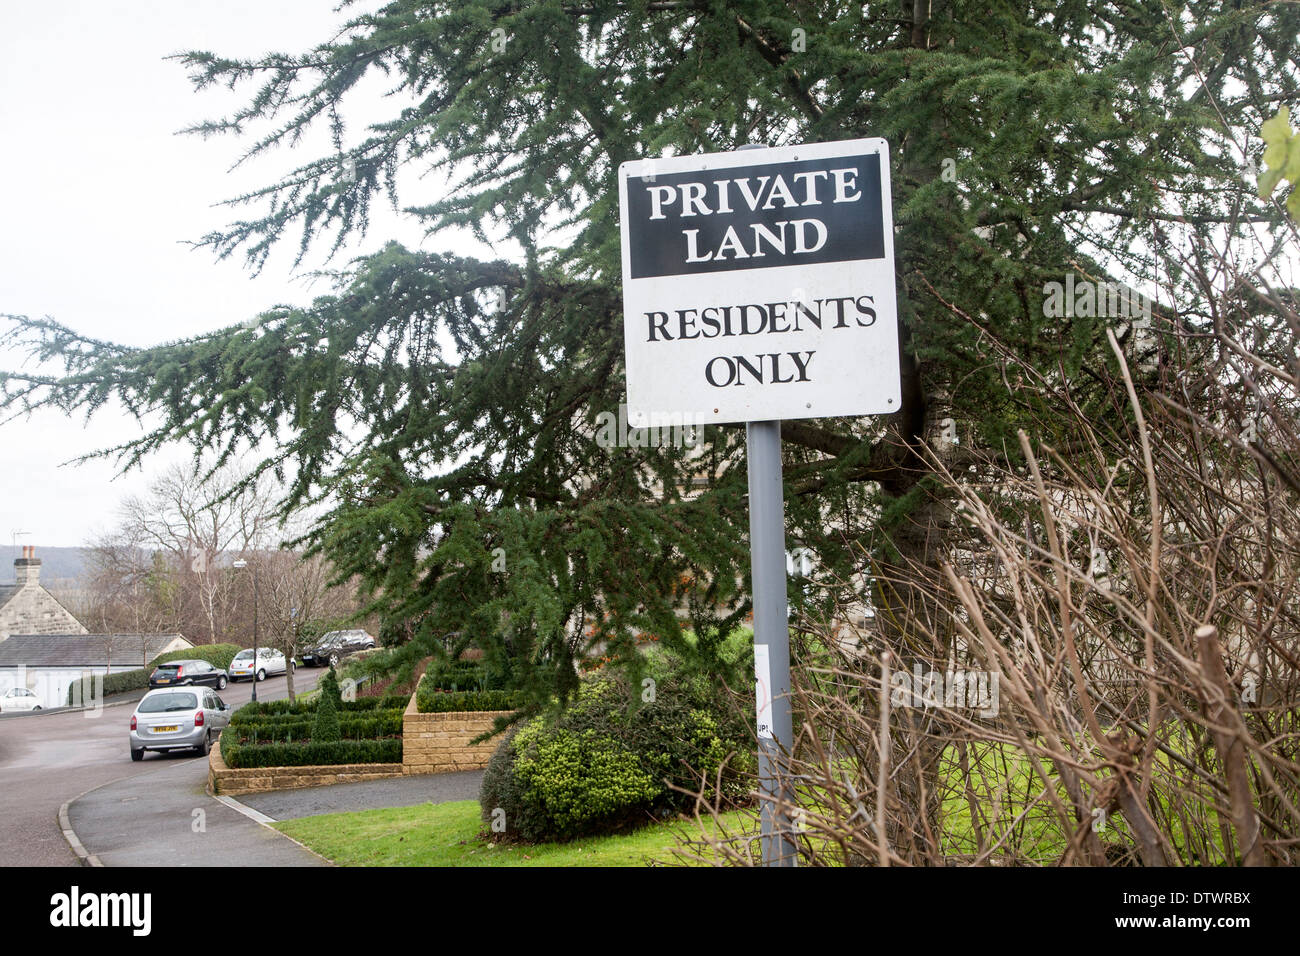 Sign for private land residents access only on suburban residential housing development, Bath, England Stock Photo